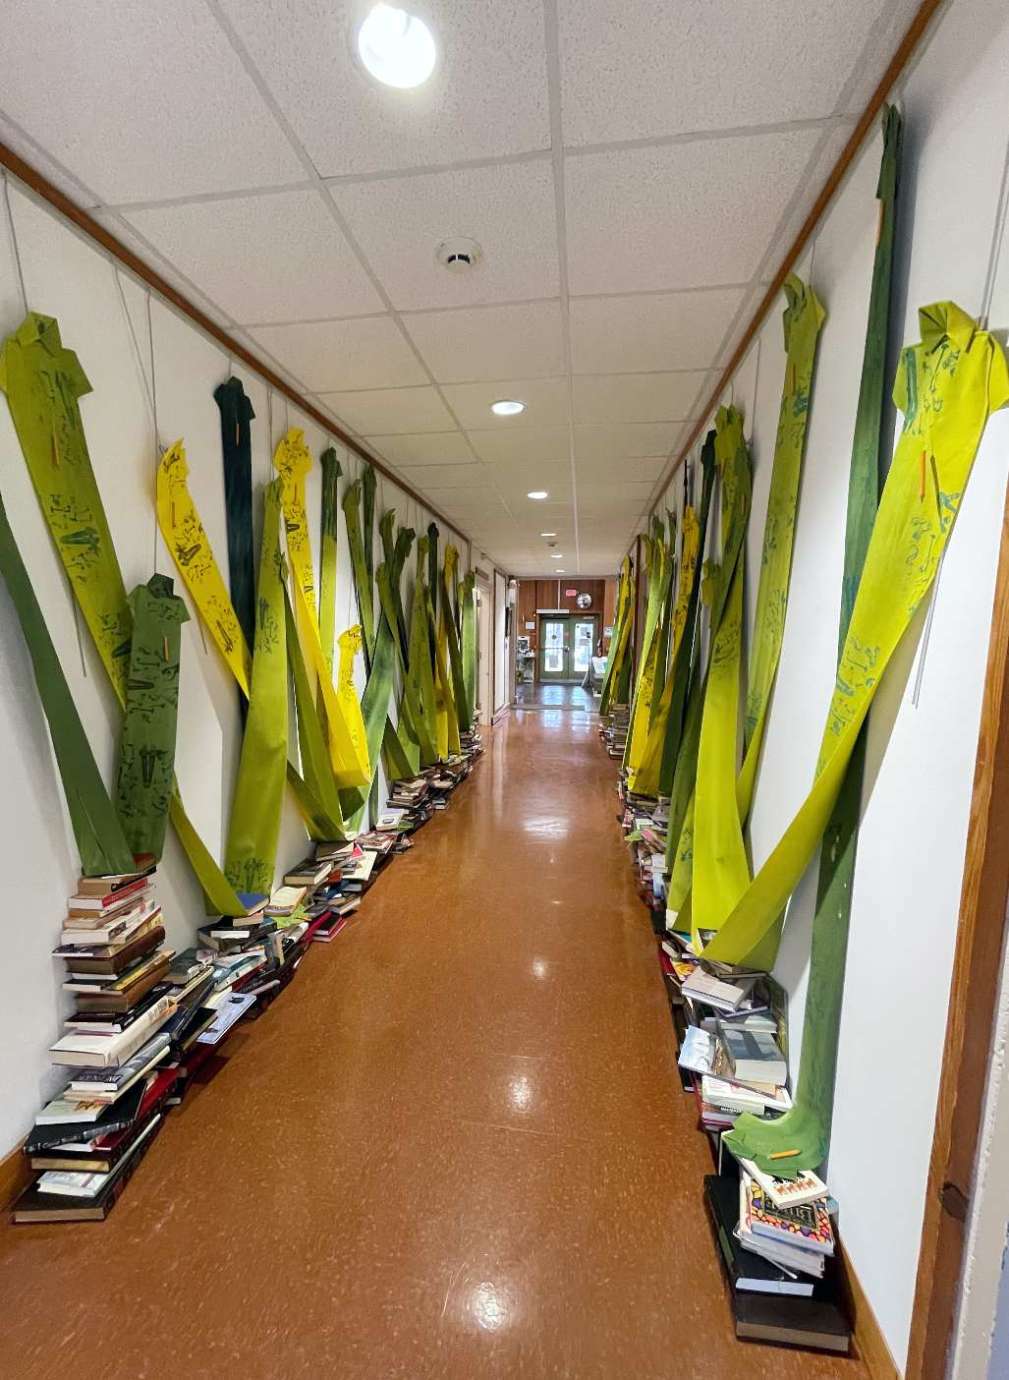 Jan-Ru Wan's installation which includes long hanging green shirts draping down the wall and supporting stacked books on the ground